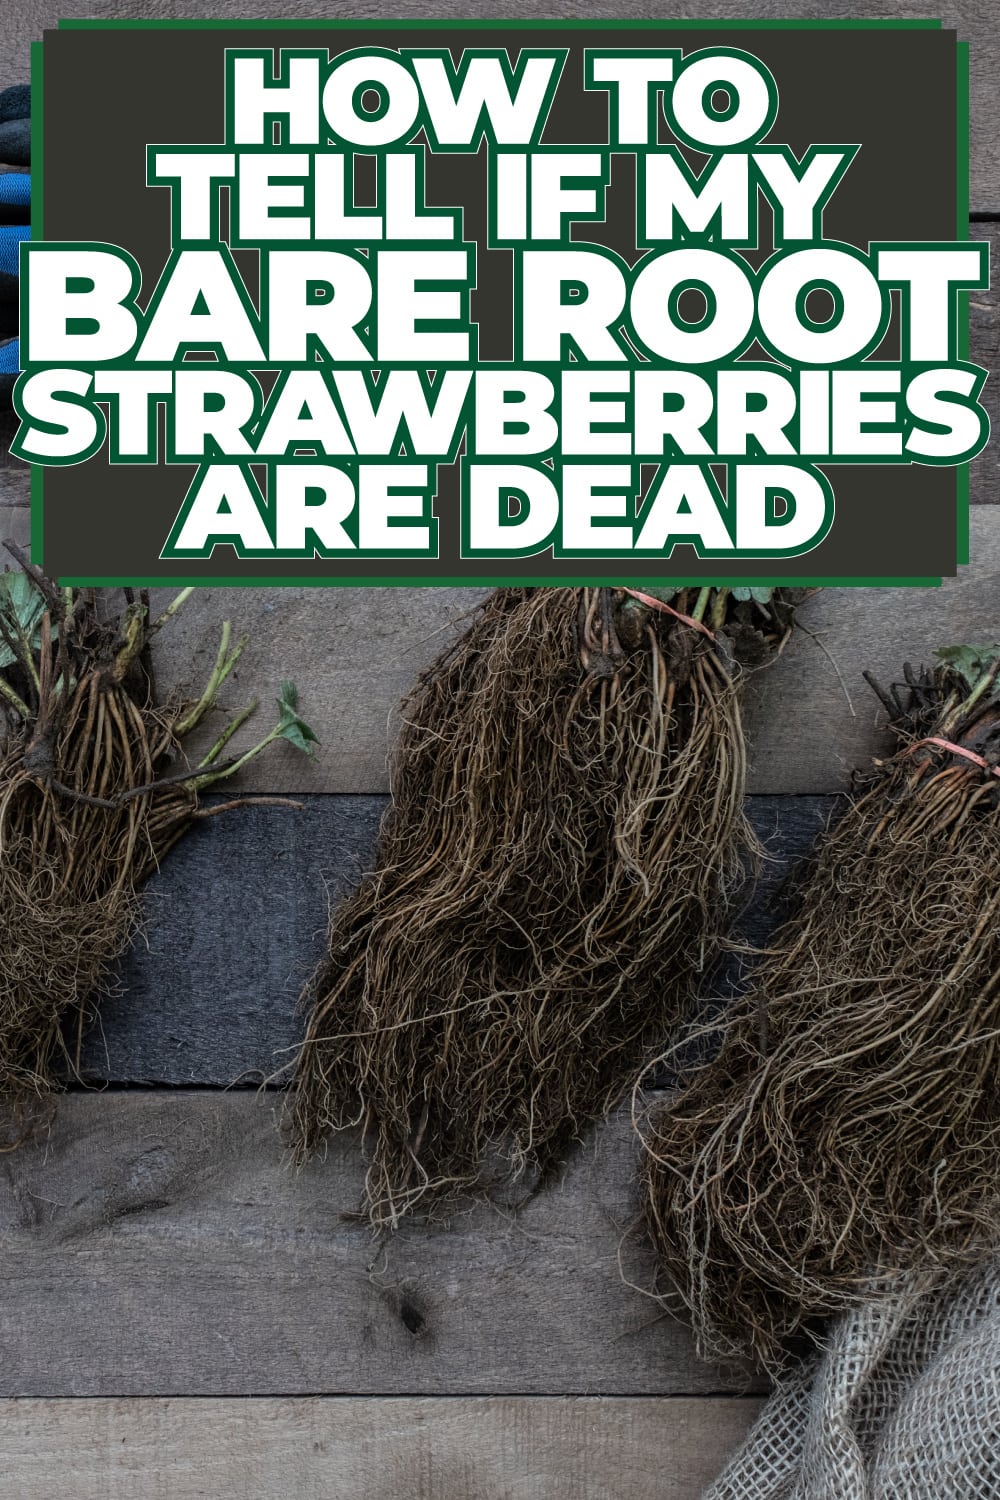 How To Tell If My Bare Root Strawberries Are Dead